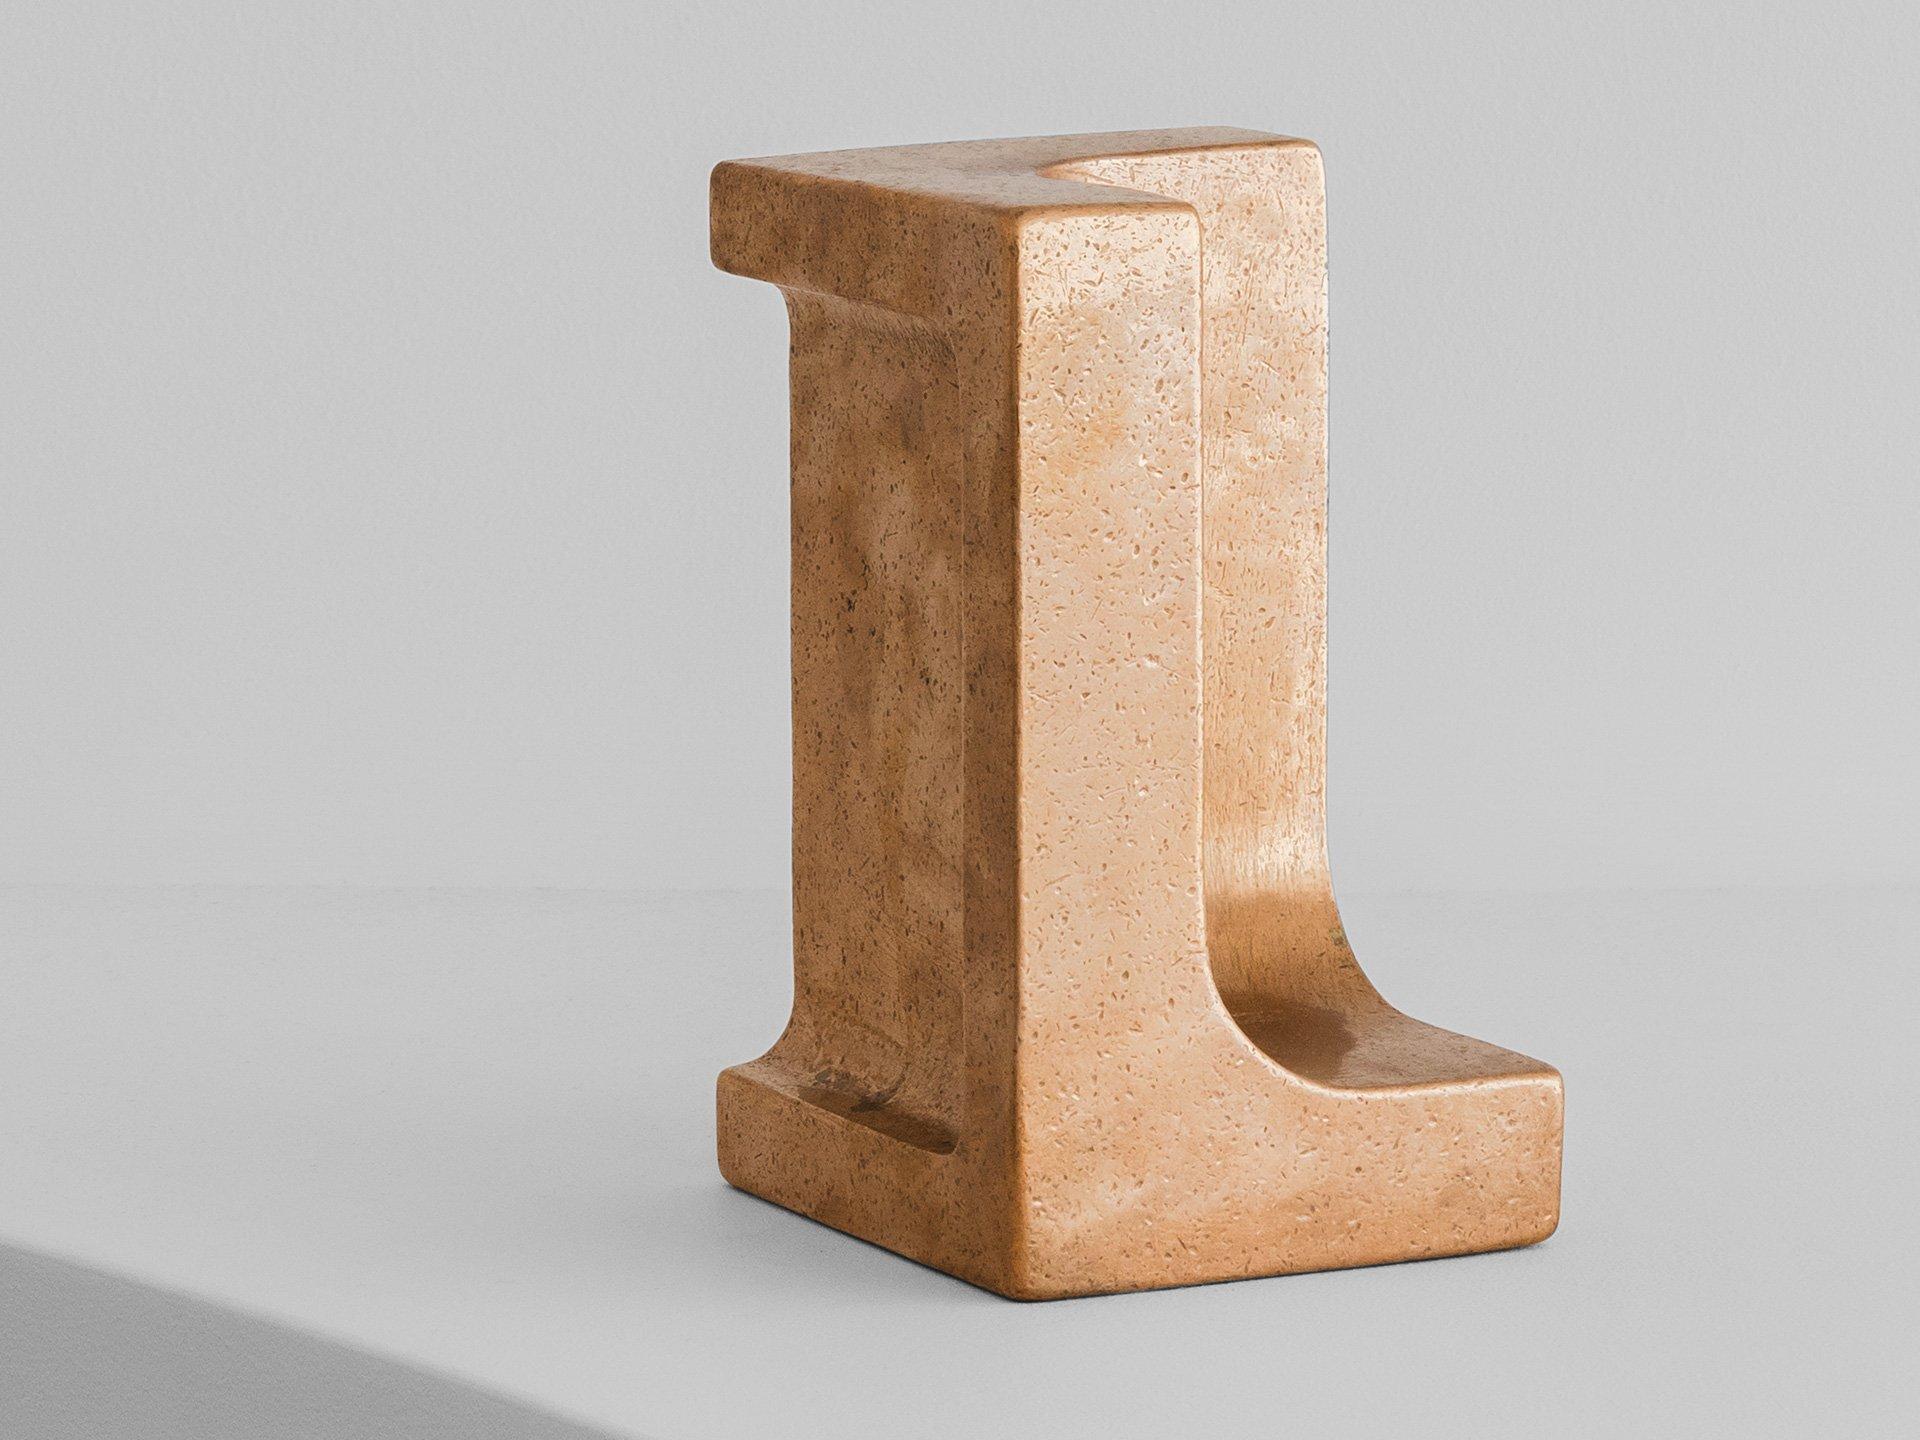 Langley Bookend by Henry Wilson
Dimensions: W 11 x D 10 x H 17 cm
Materials: Sand-cast Gunmetal bronze

Langley Bookend is part modernist sculpture part functional shelf accessory. It is big and bold, comes in a single size and weighs a hefty 10kg.